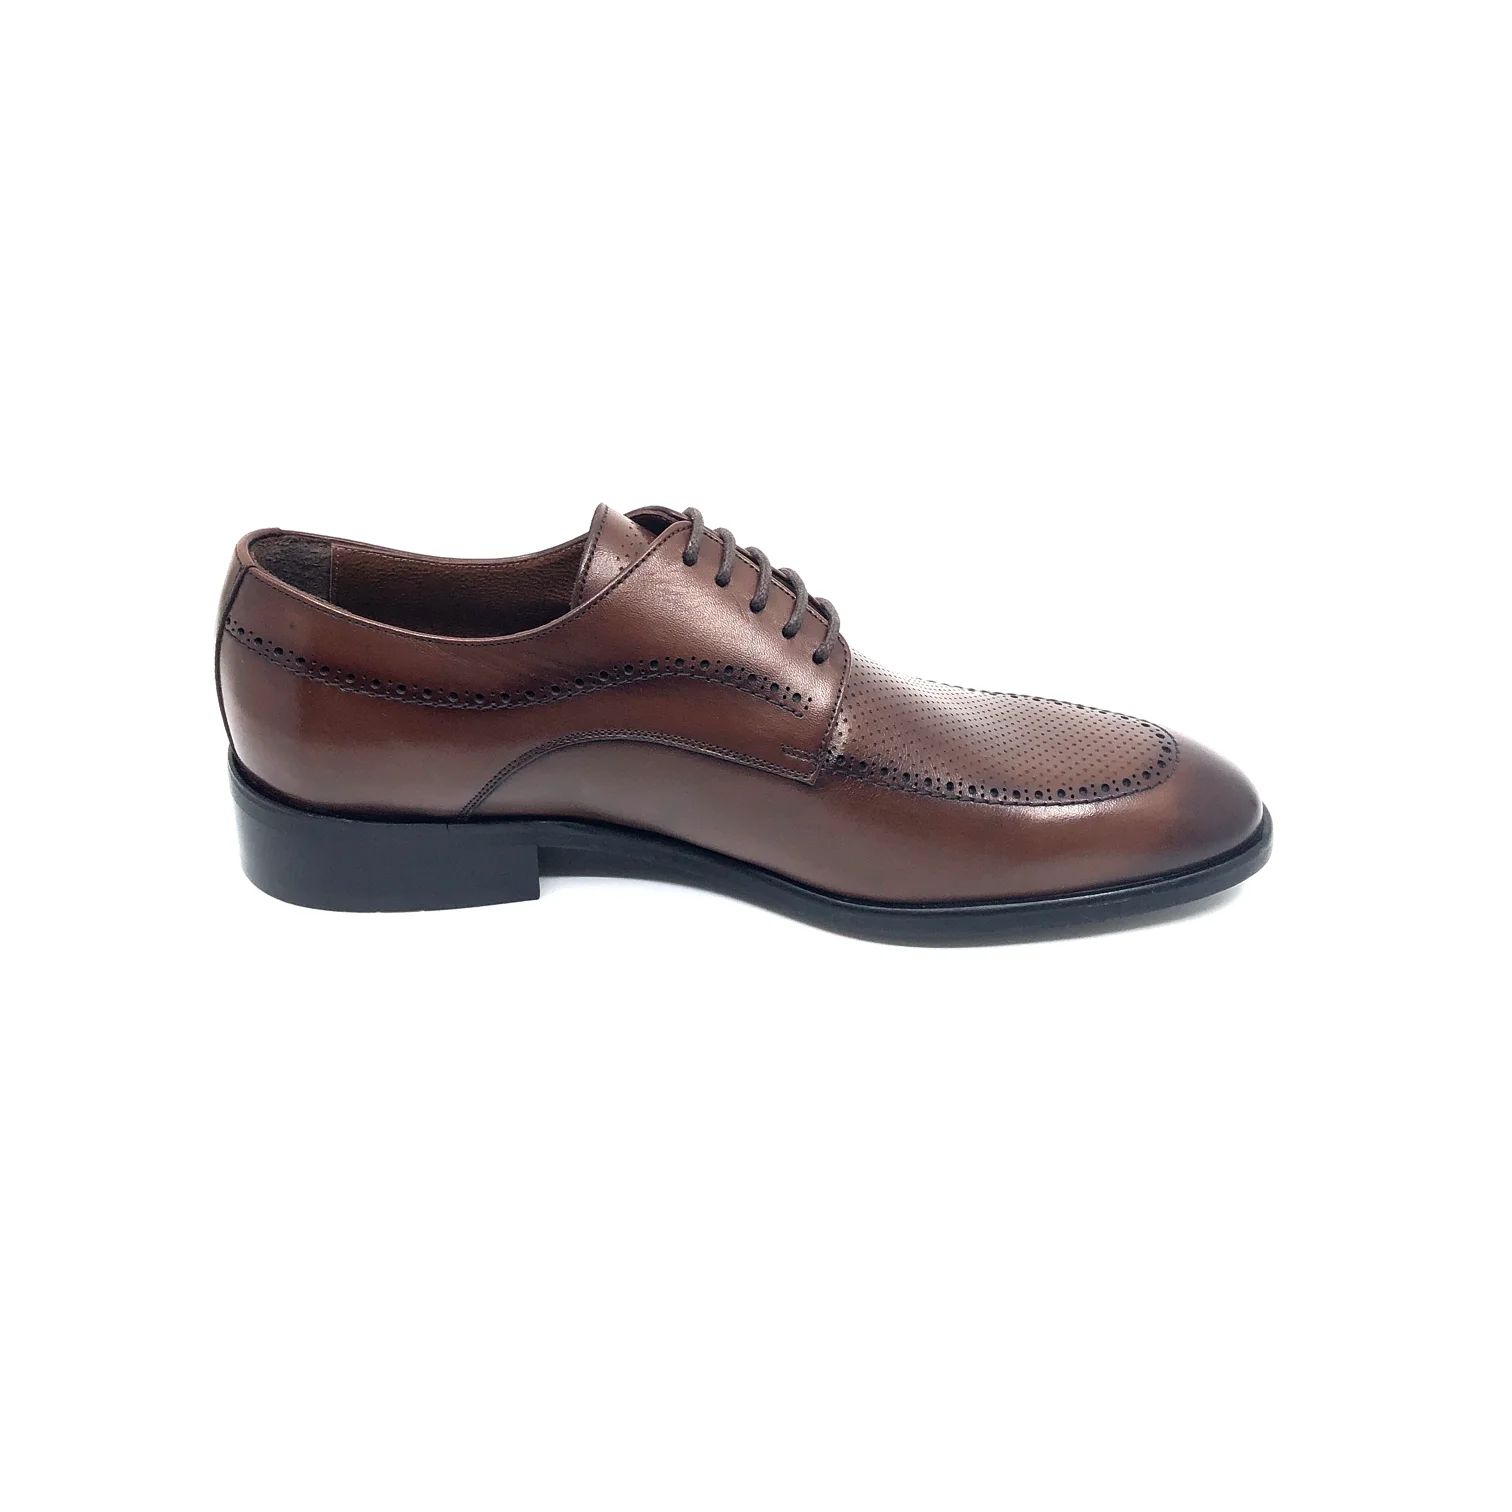 

Fosco Lace Up Men's Classic Formal Shoes %100 Genuine Leather Tan-Brown Colour Neolie Sole